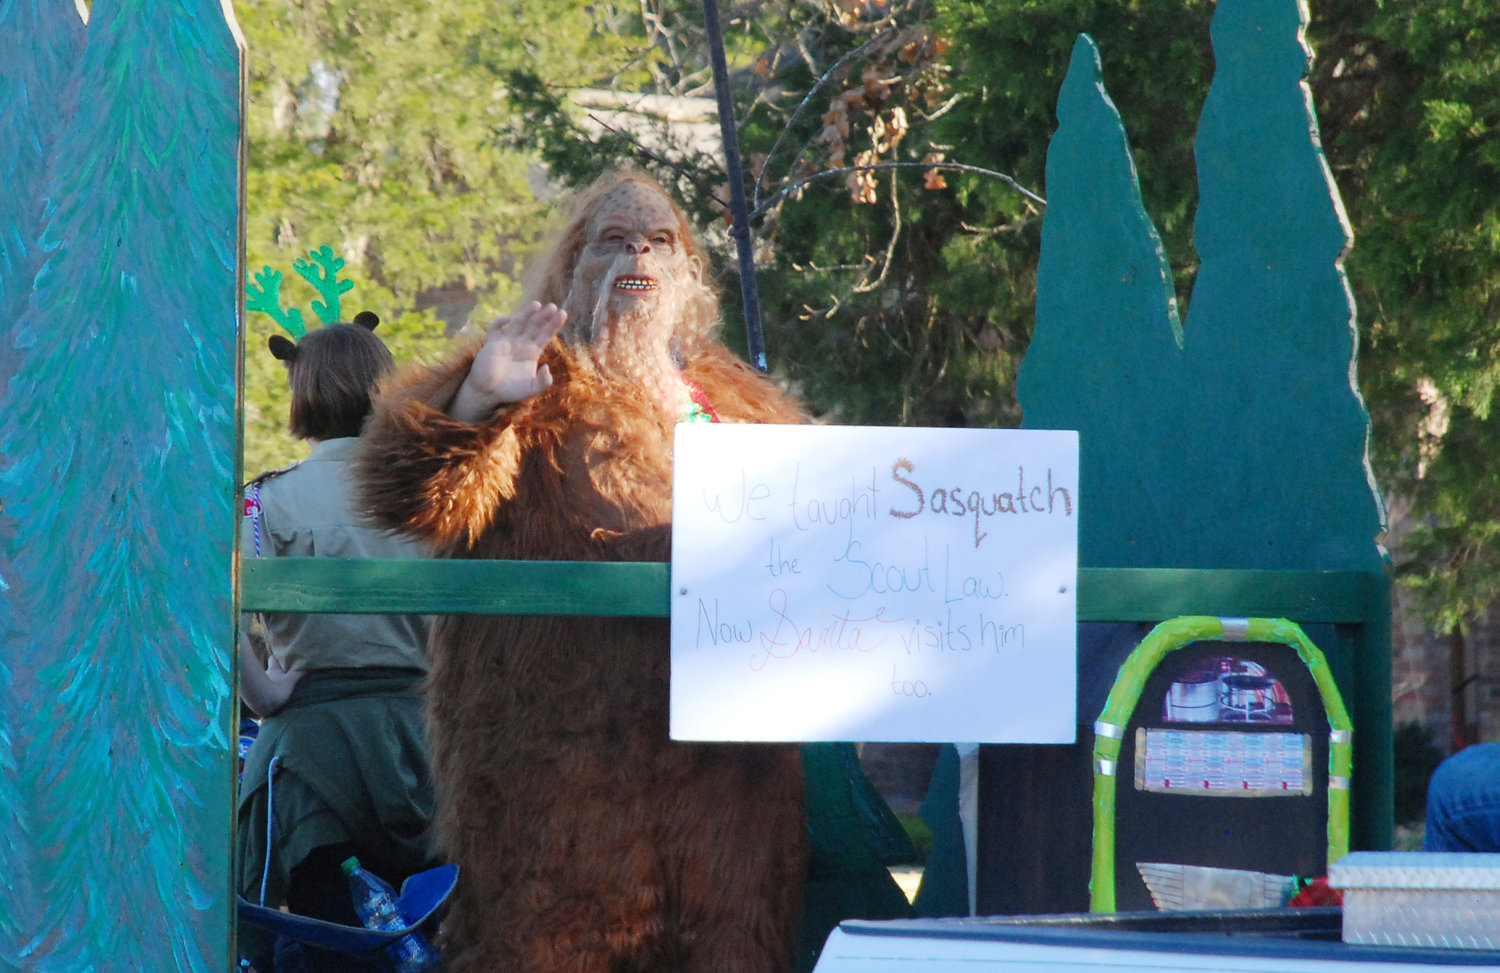 SASQUATCH made an appearance in the Nixa Christmas Parade, riding aboard a float with some boy scouts.